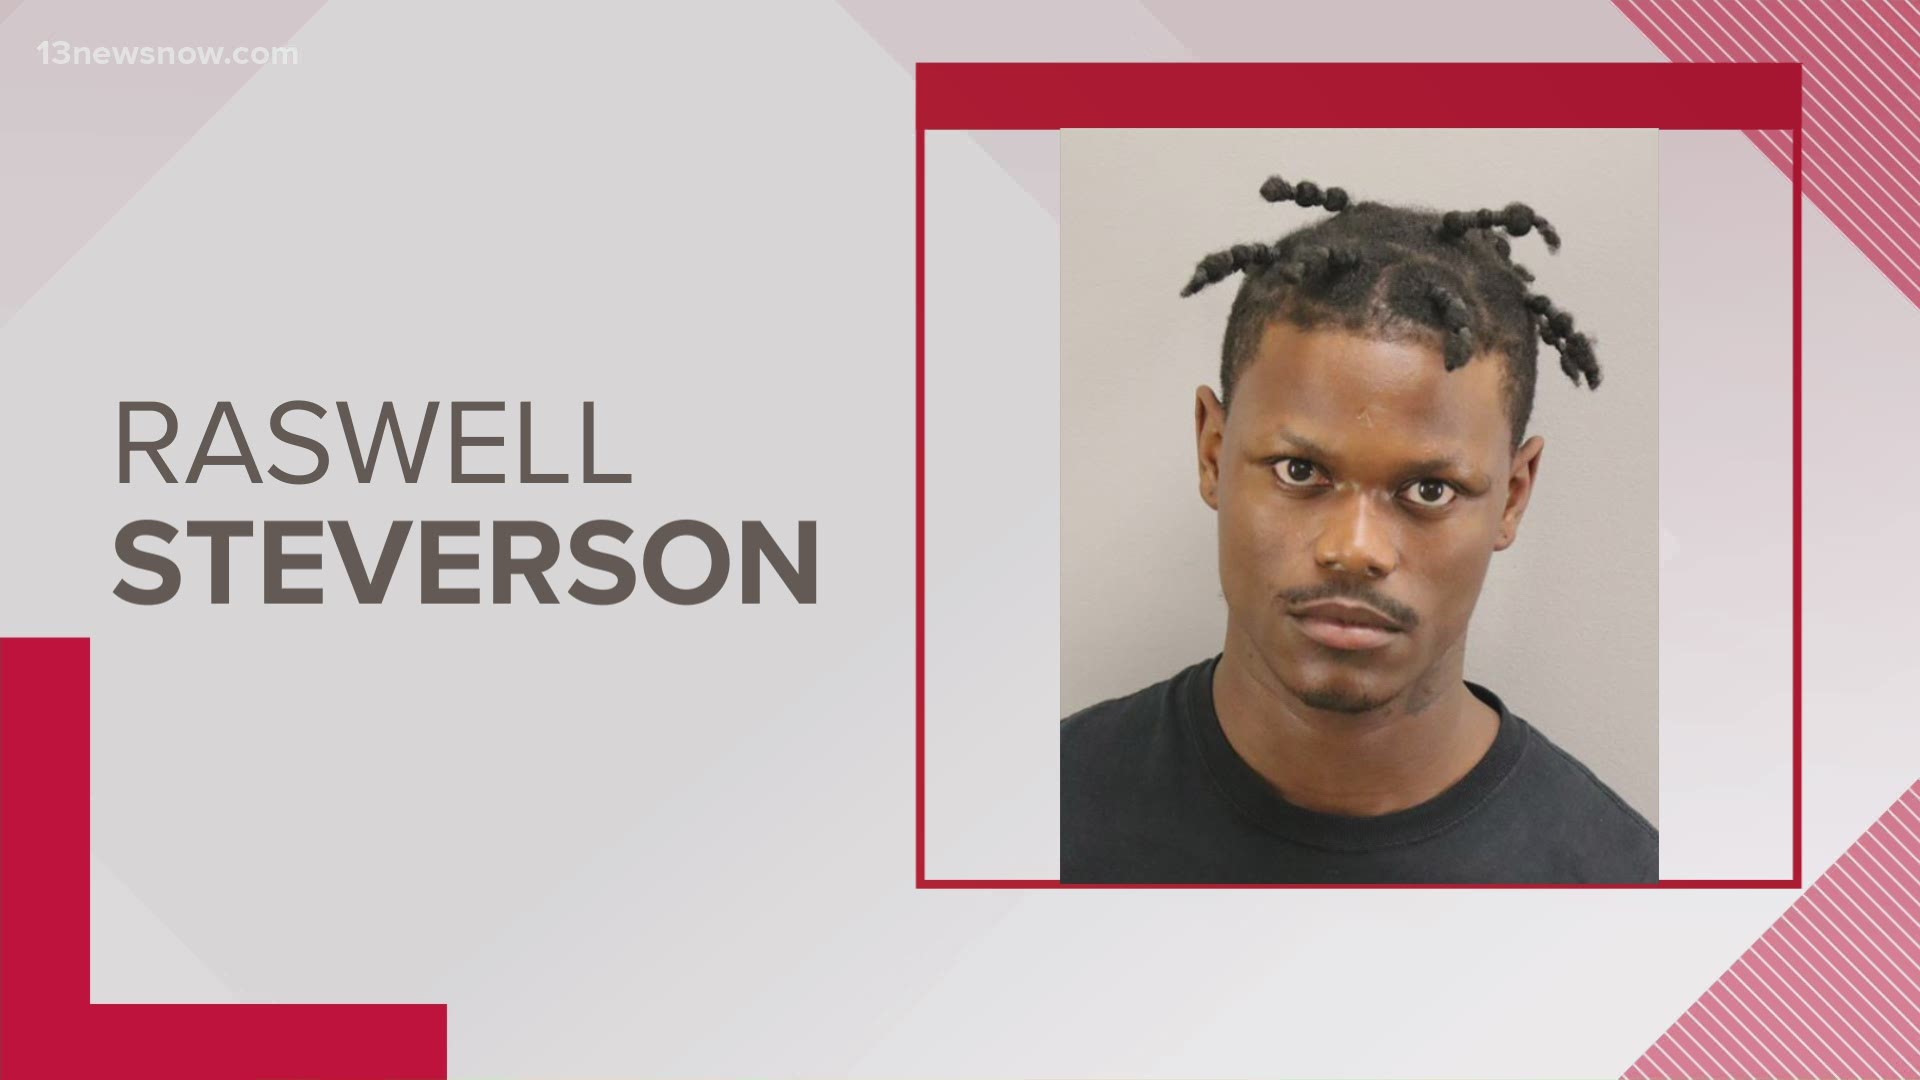 Officers said Raswell Steverson, 22, faces charges related to the shootings that took place on March 26, 2020. They include gun and malicious wounding charges.